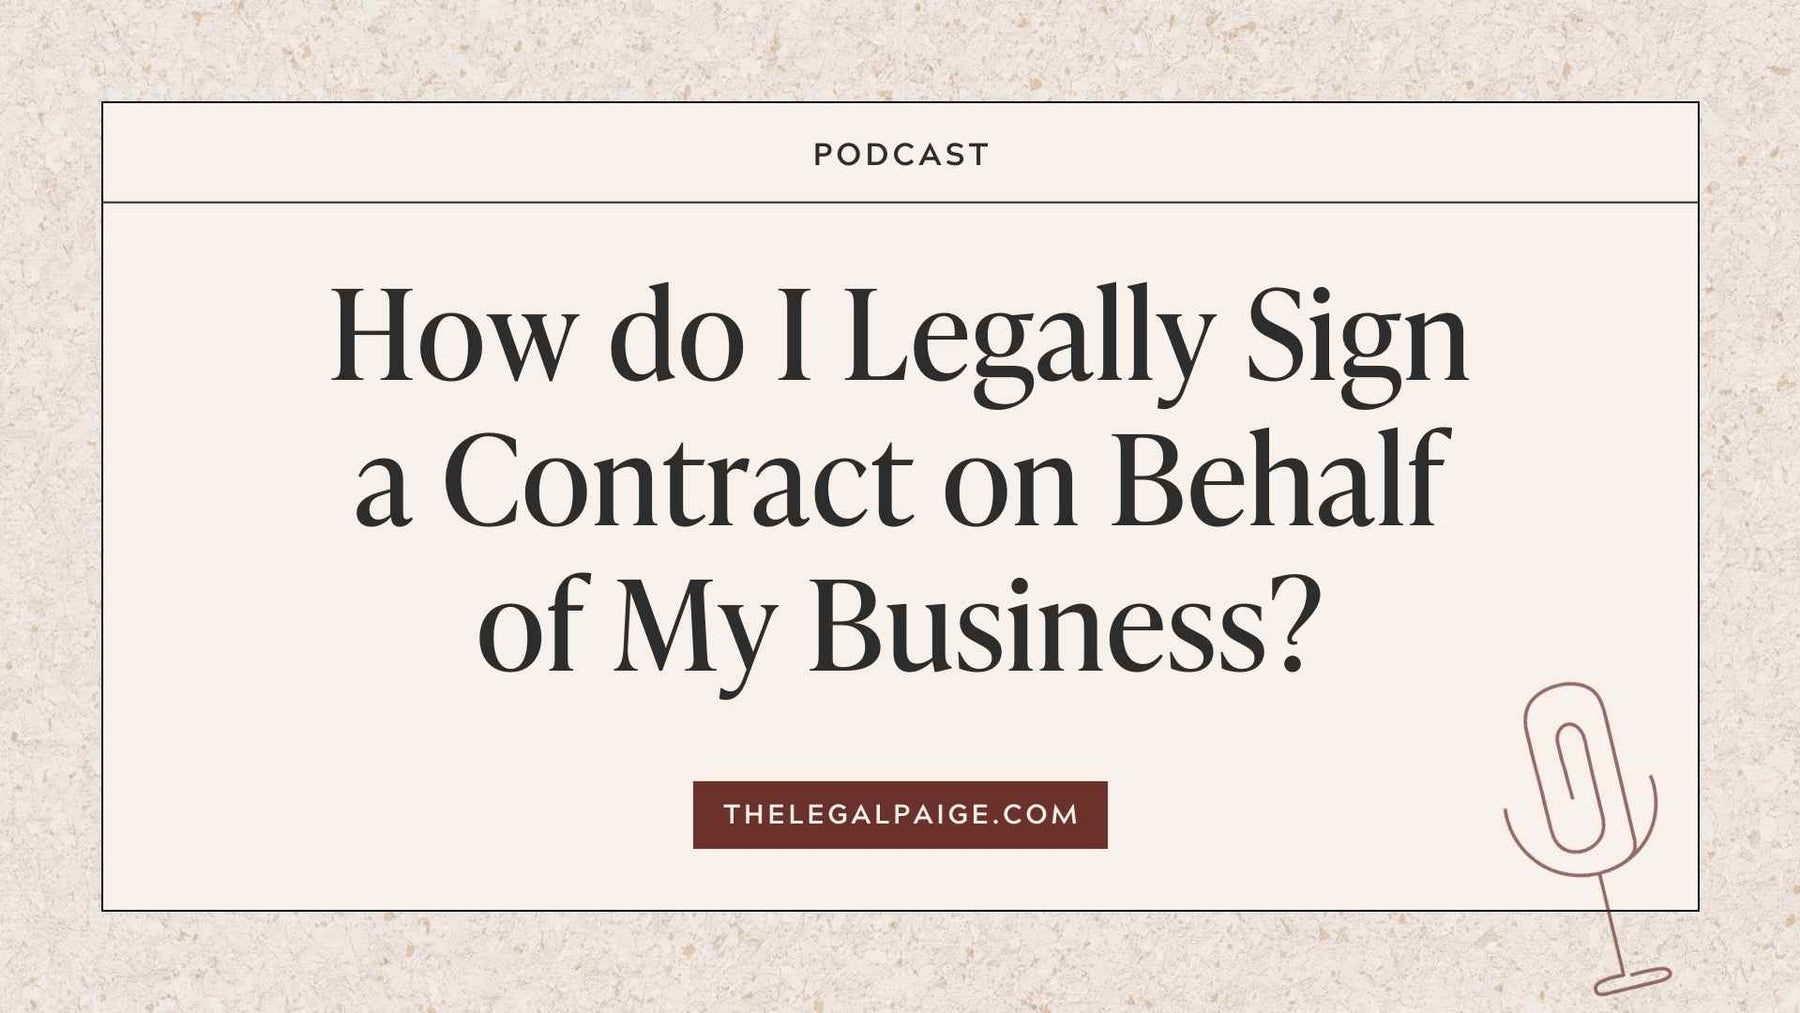 How Do I Legally Sign A Contract on Behalf of My Business?